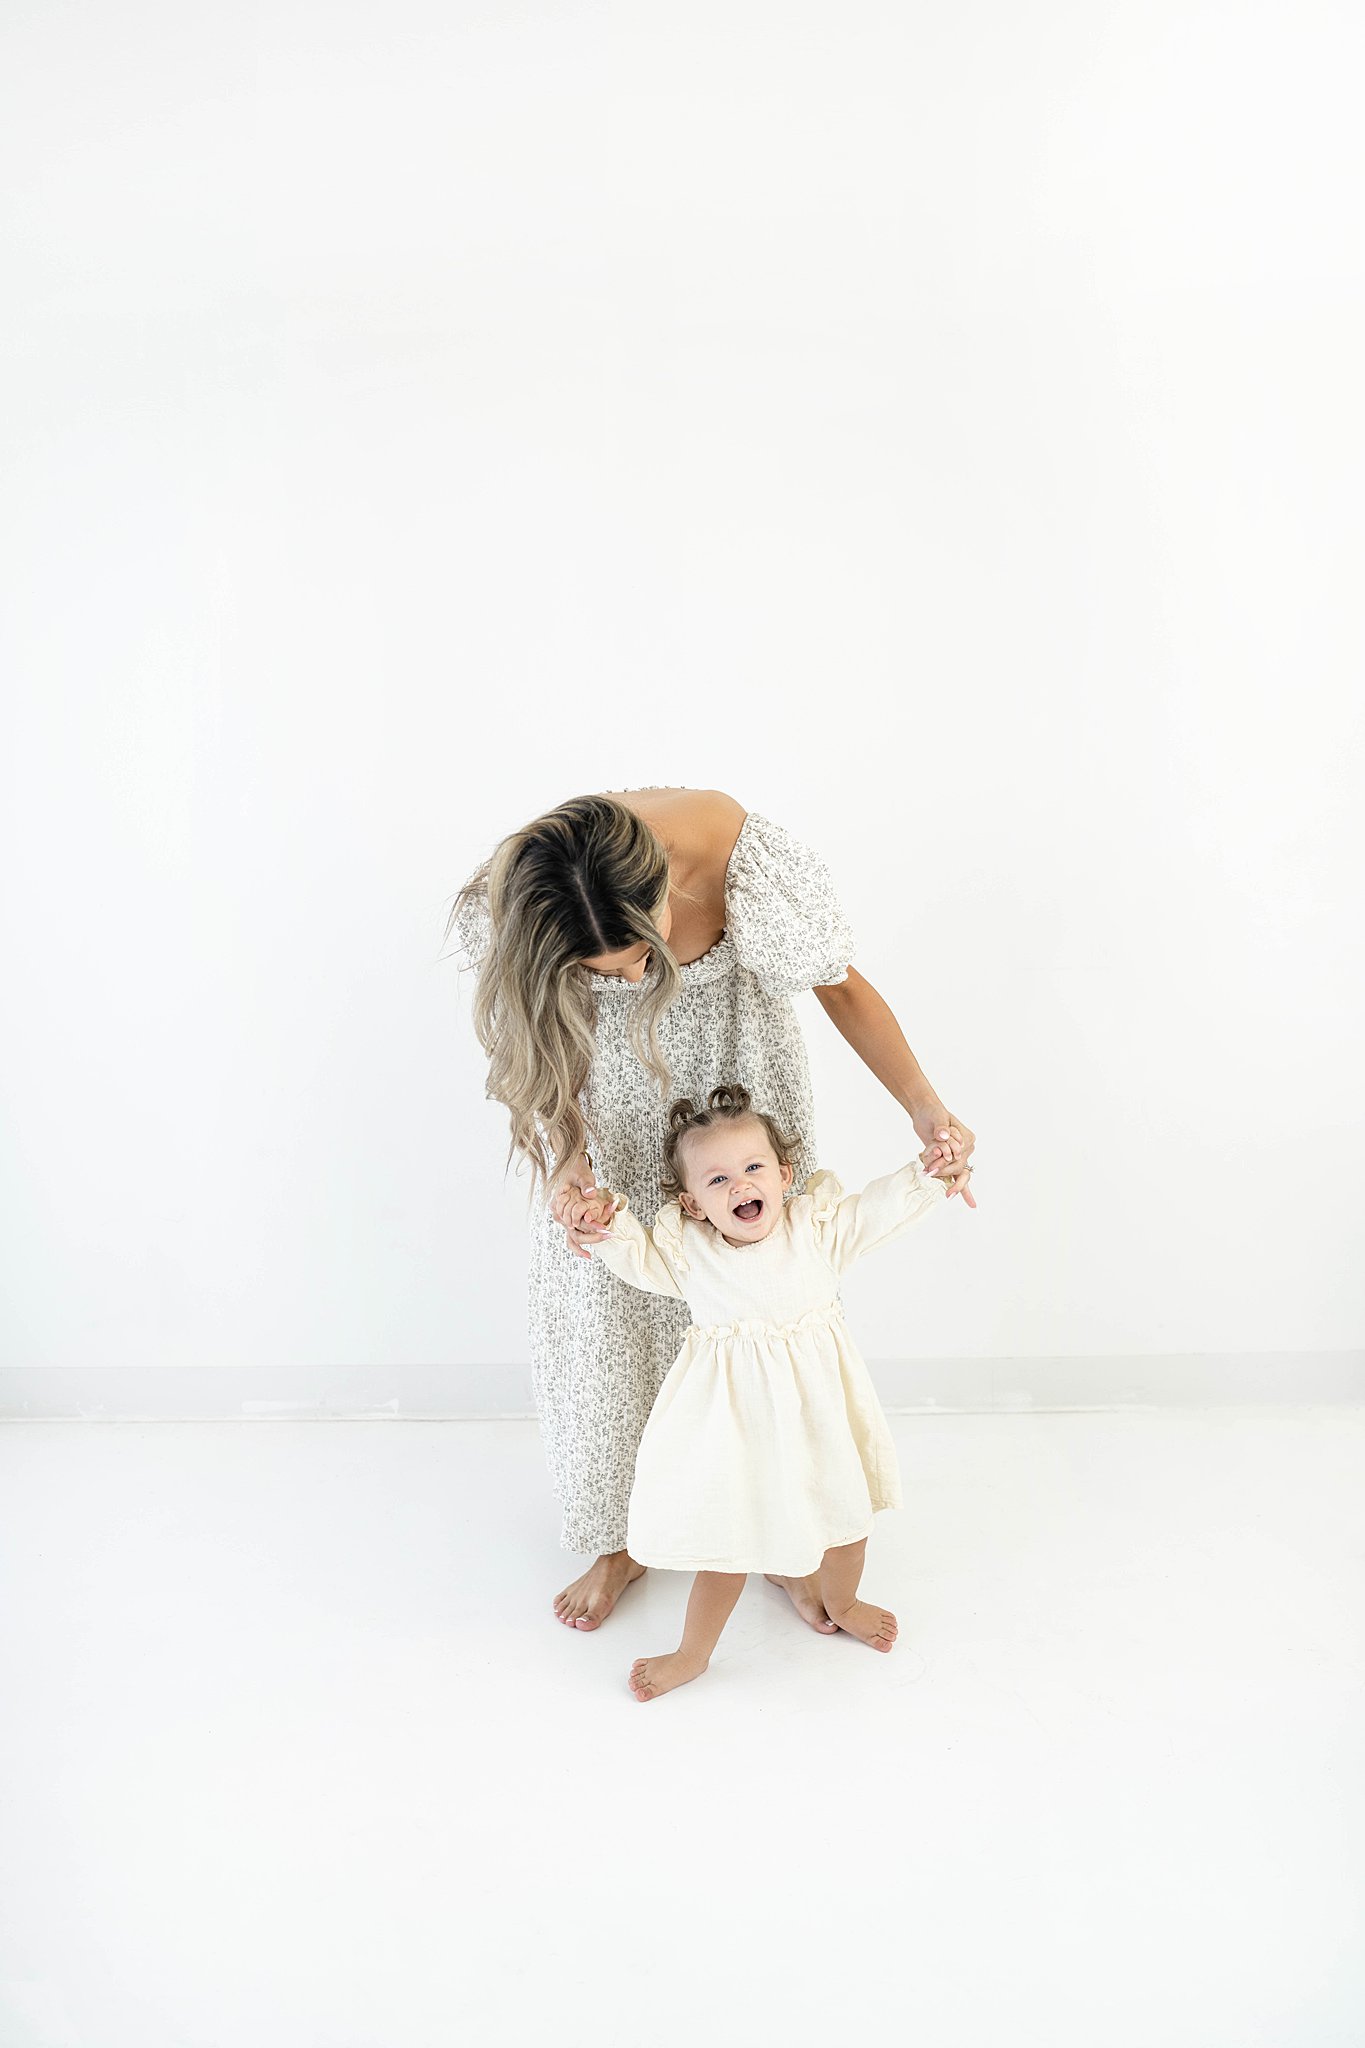 A mother stands in a studio holding the hands and playing with her toddler daughter